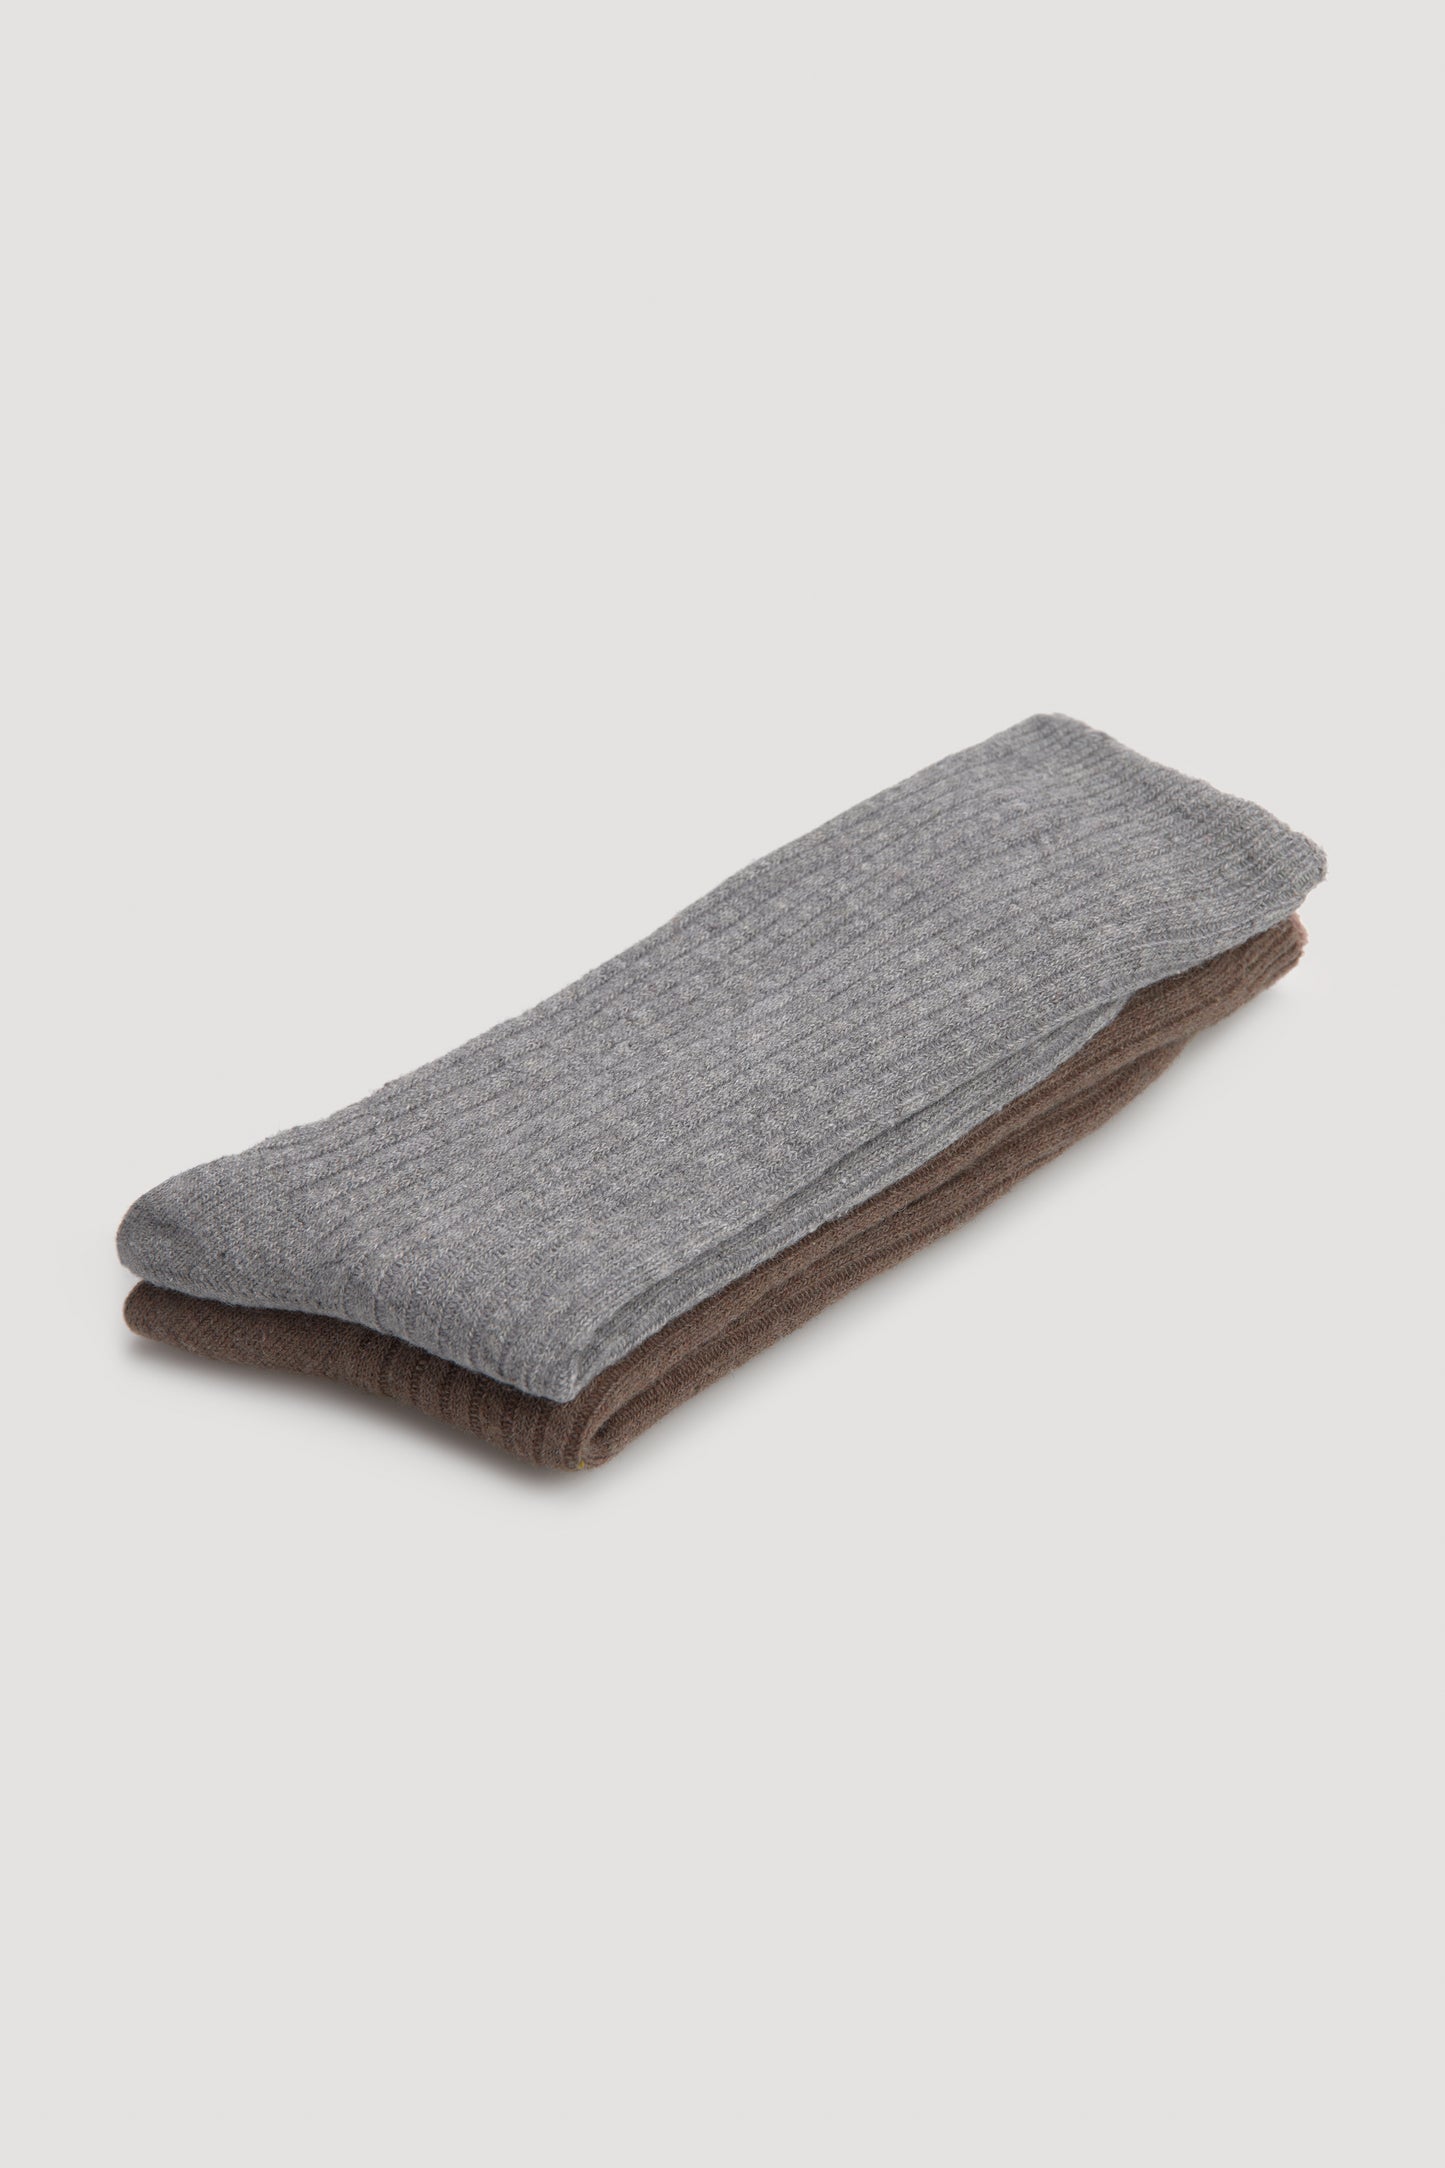 Ysabel Mora Double Sock - Light grey and brown soft and warm fleece lined knitted ribbed socks with soft top cuff.